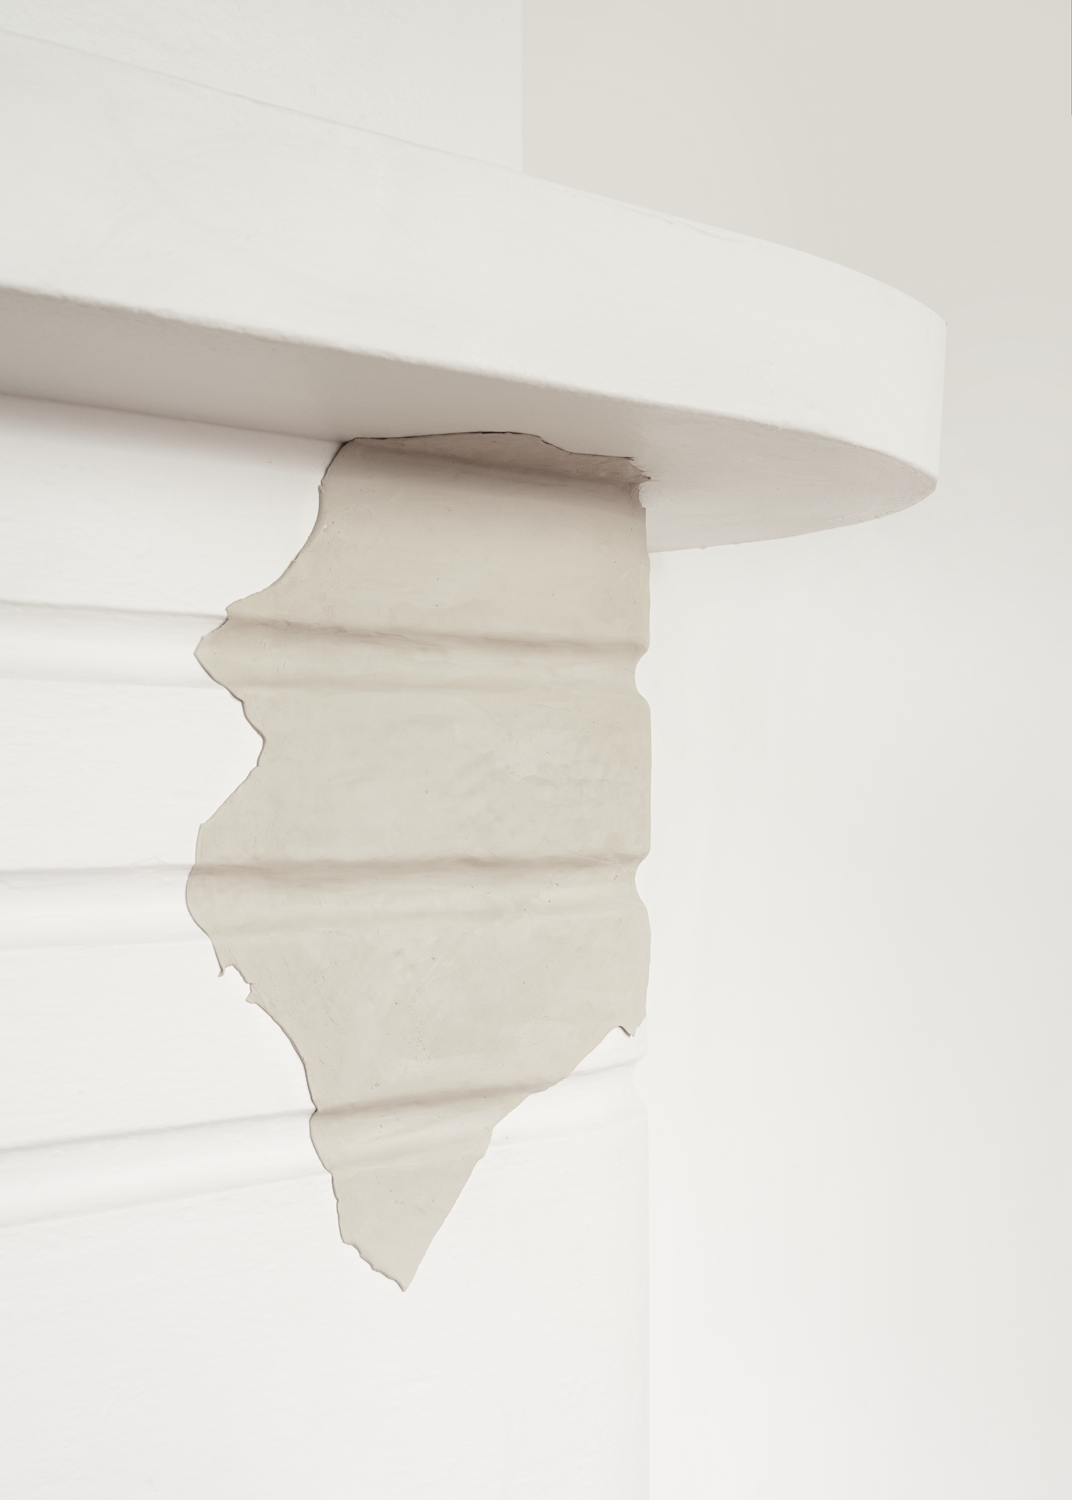 Clay pressed into ceiling cornice